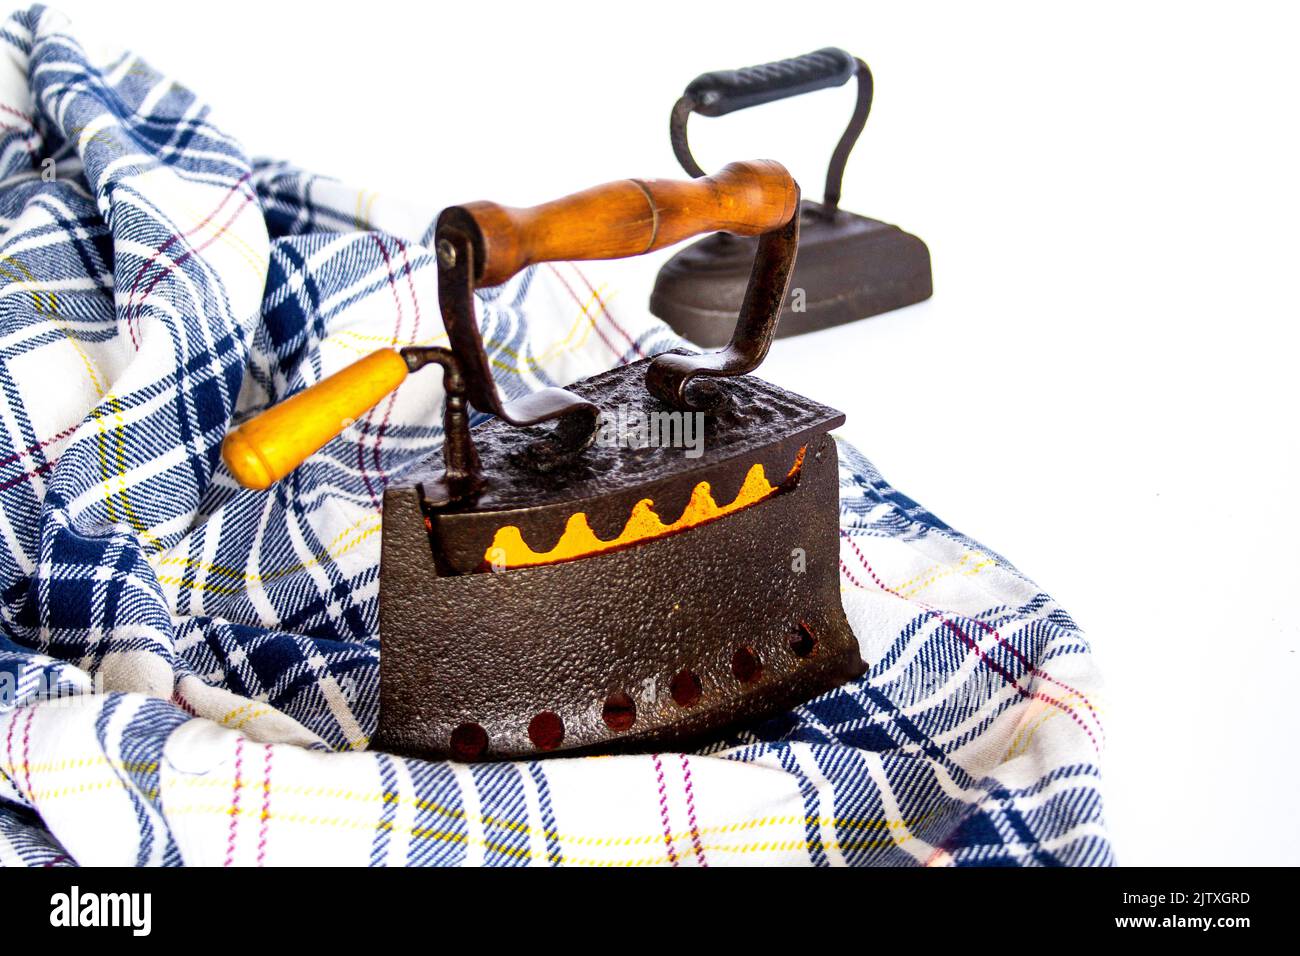 Image of old coal-fired irons with a shirt to be ironed. Old memories and customs Stock Photo